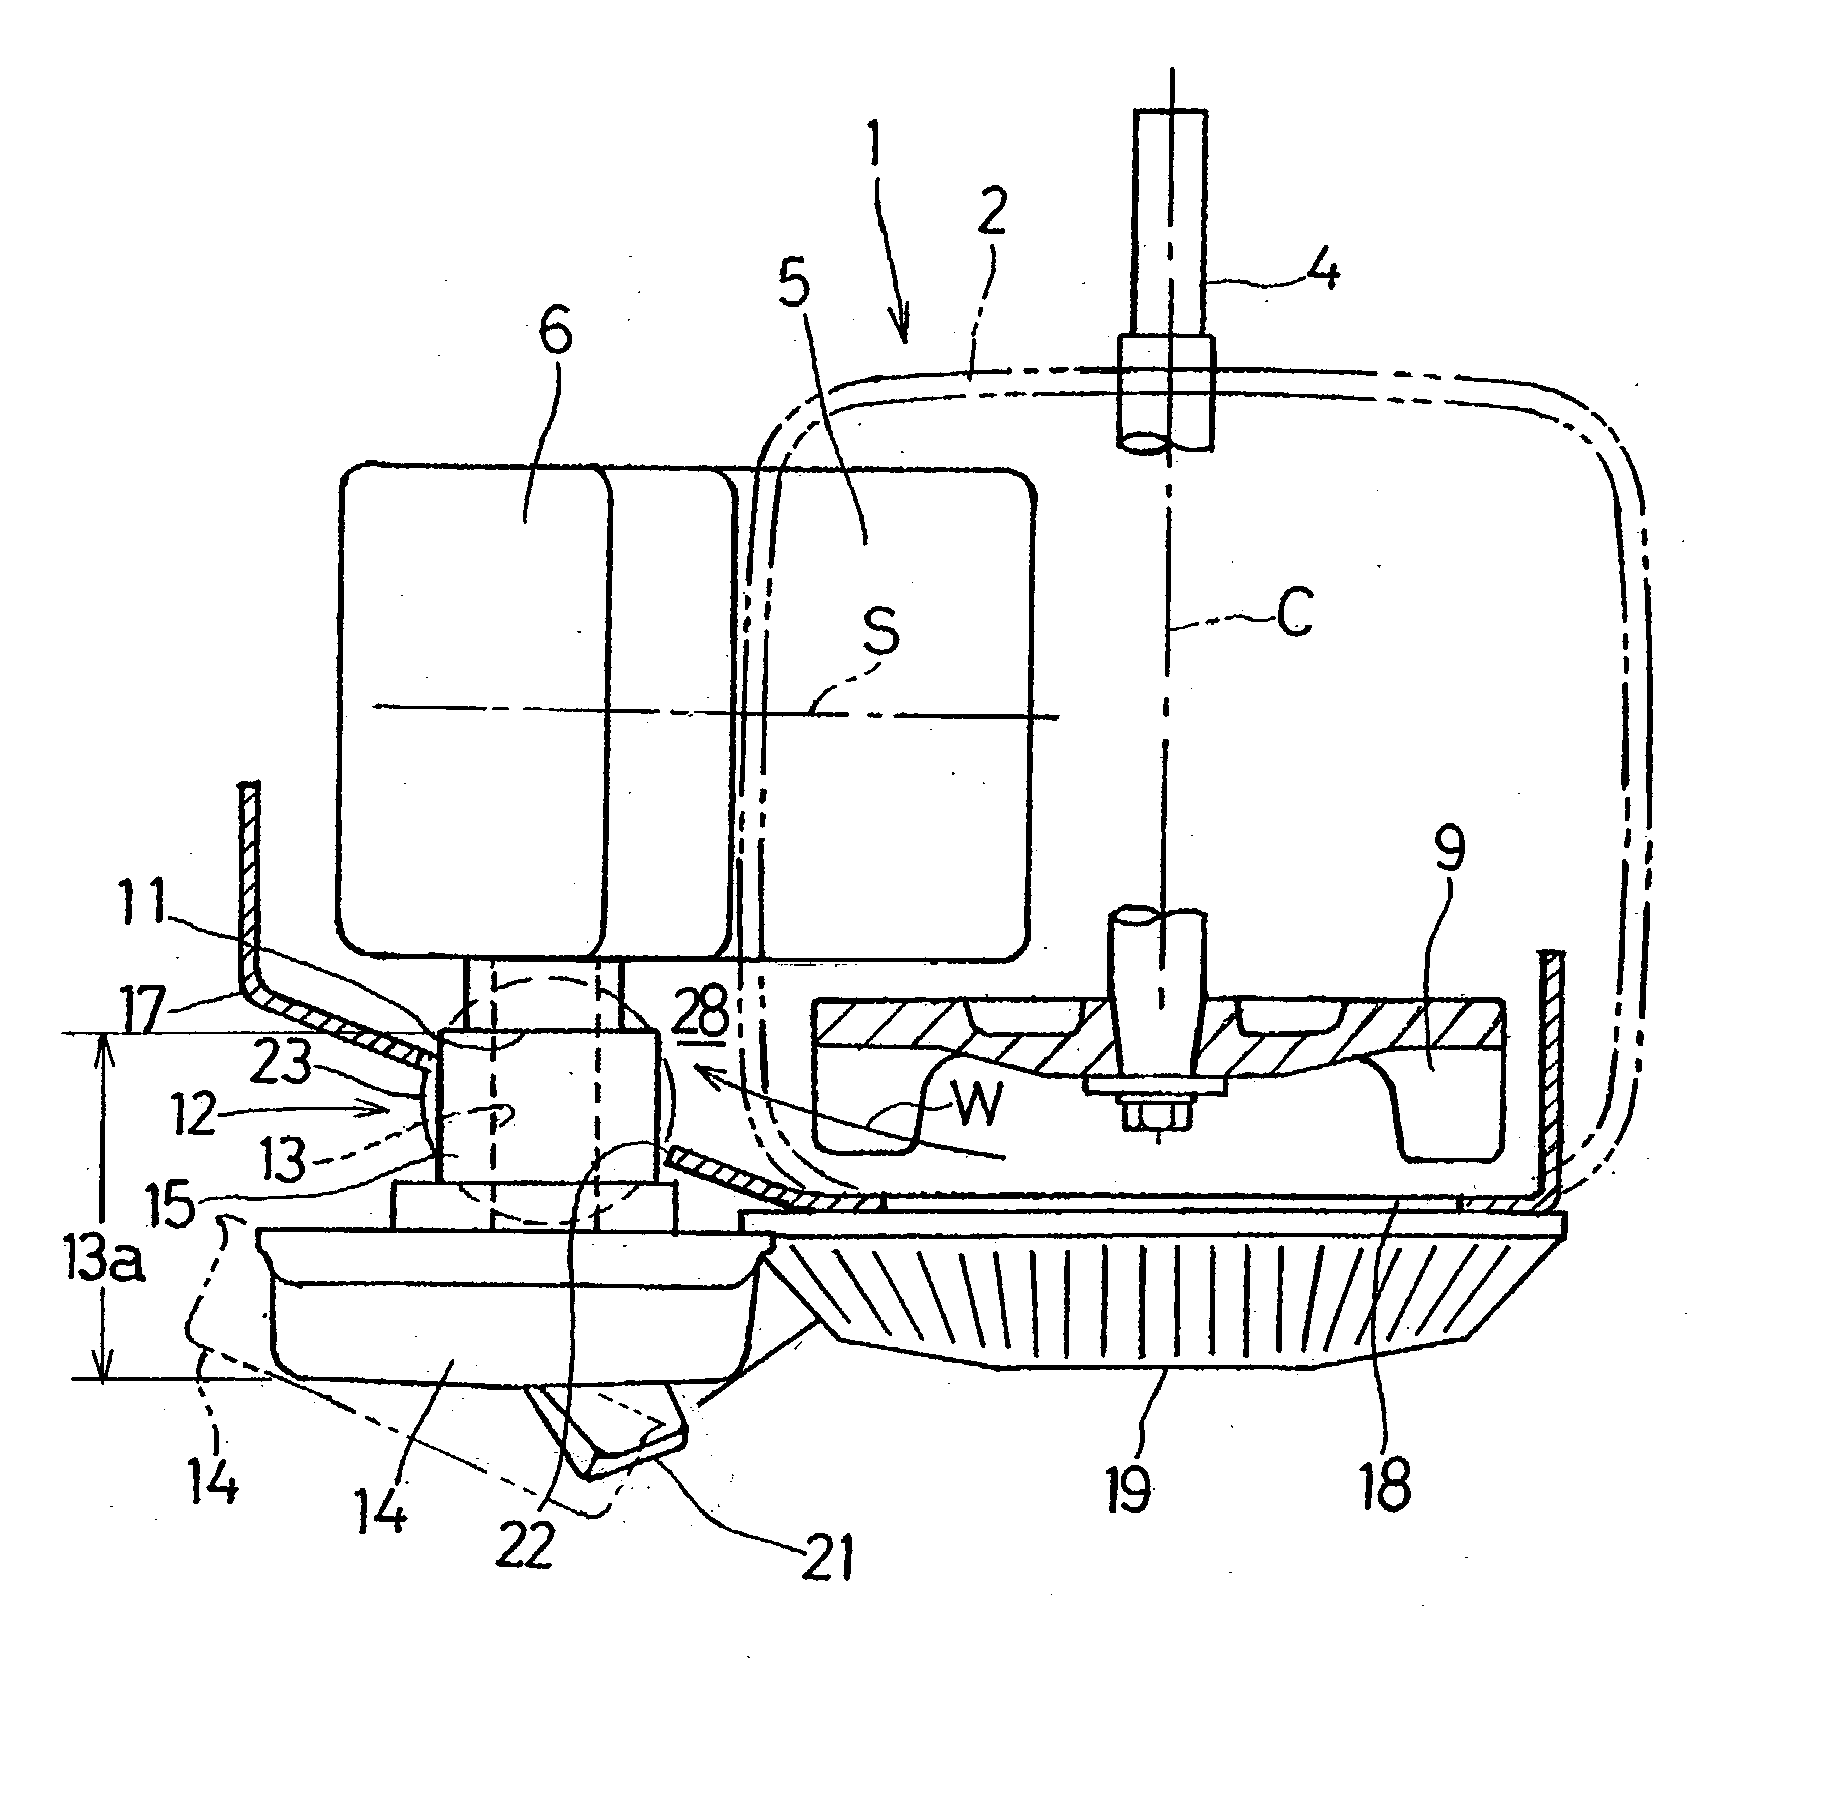 Small-size engine with forced air cooling system